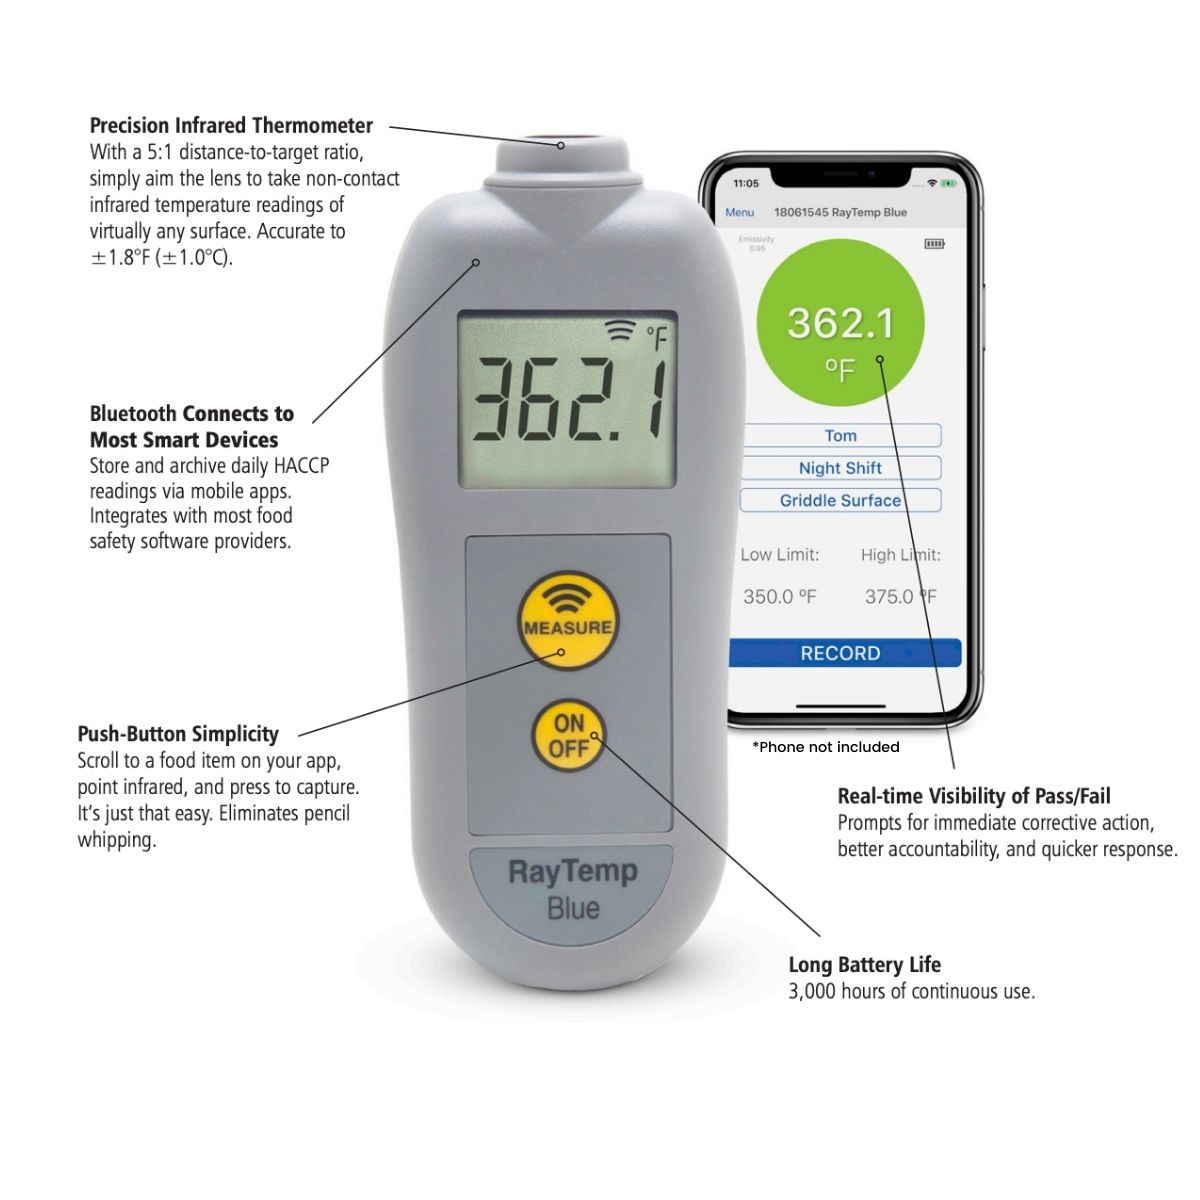 Information about a Bluetooth Infrared Thermometer RayTemp Blue